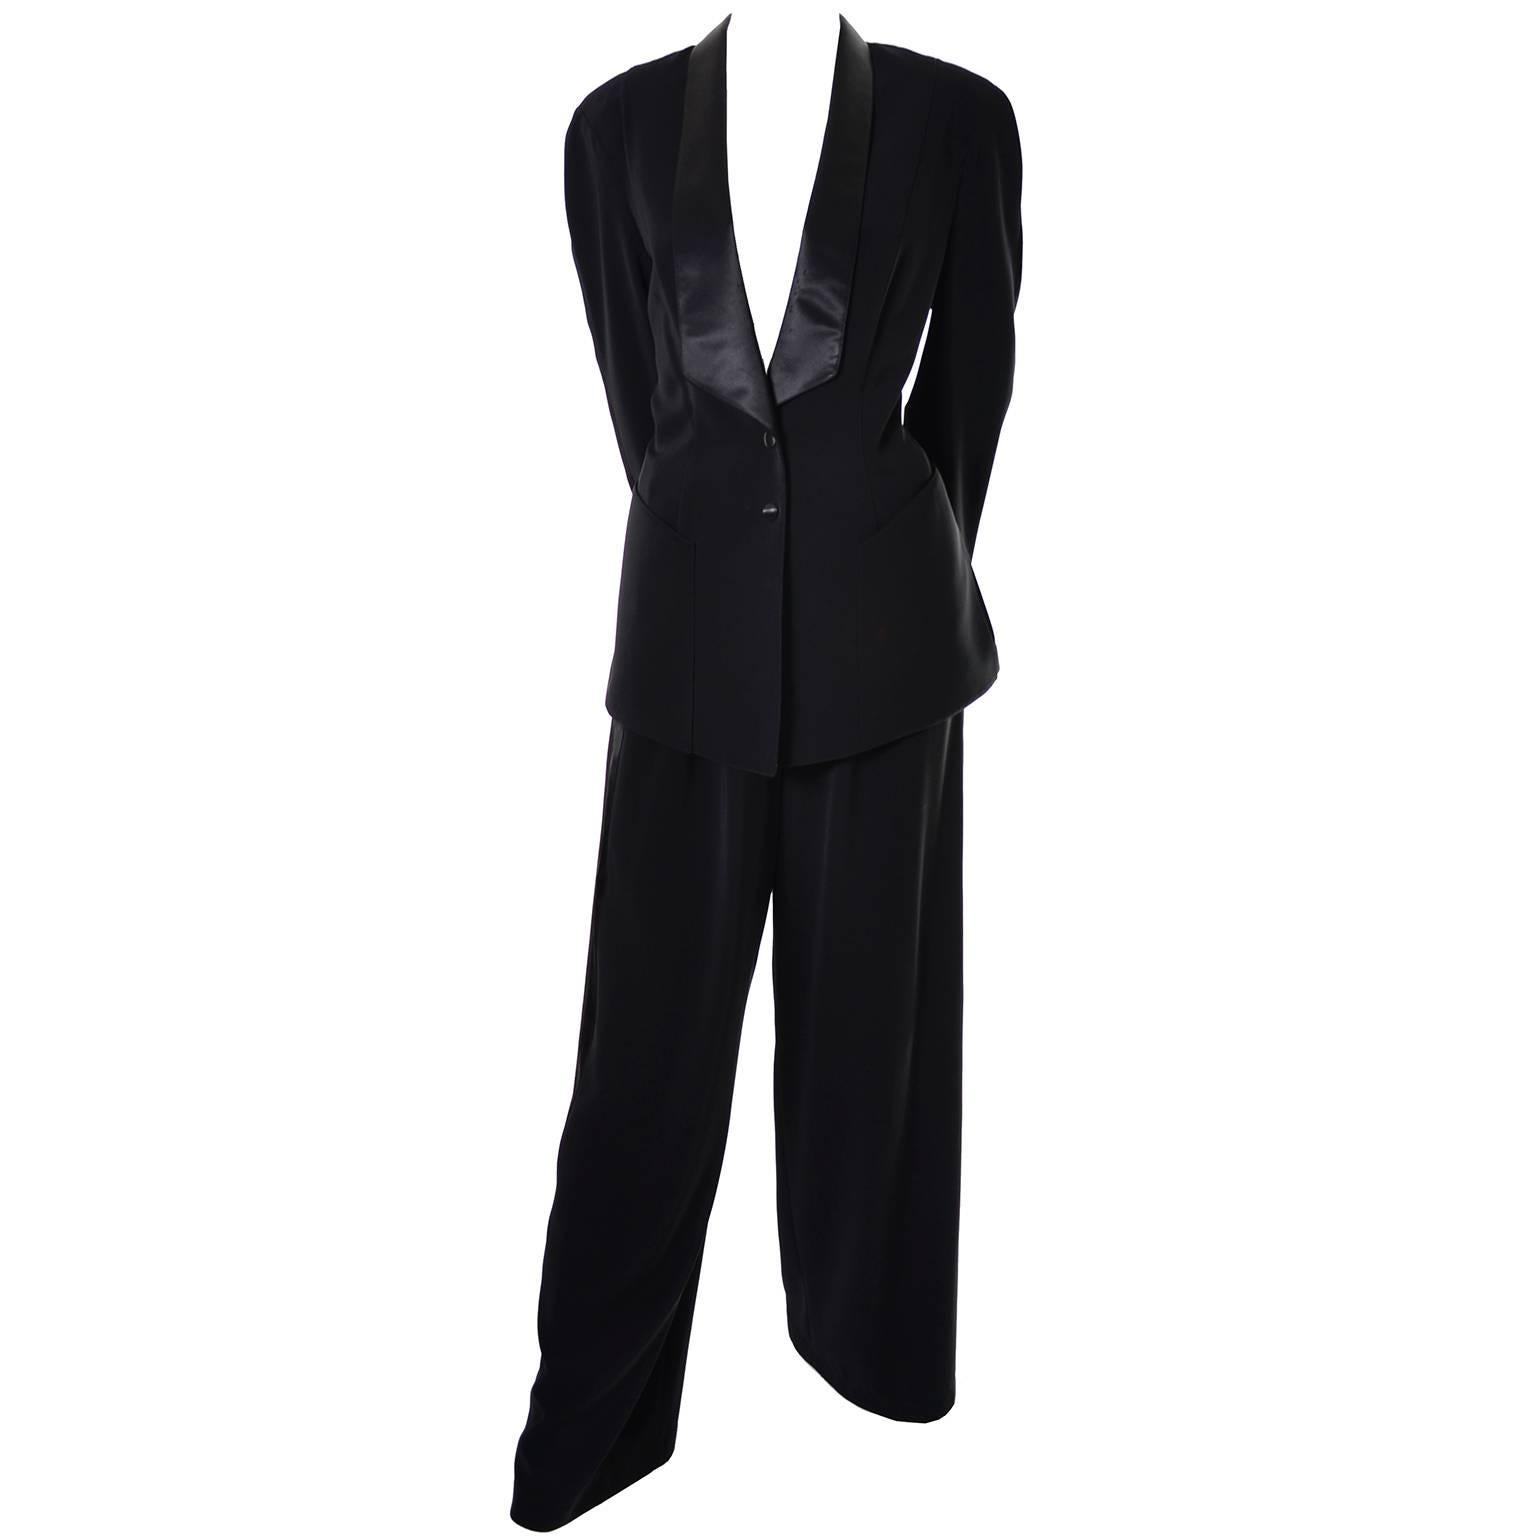 This is an incredible vintage two piece tuxedo pantsuit from Thierry Mugler! This outfit has a beautiful tuxedo style jacket with satin trim and high waisted, wide leg pants with side satin trim.  The jacket snaps in the front and has front pockets